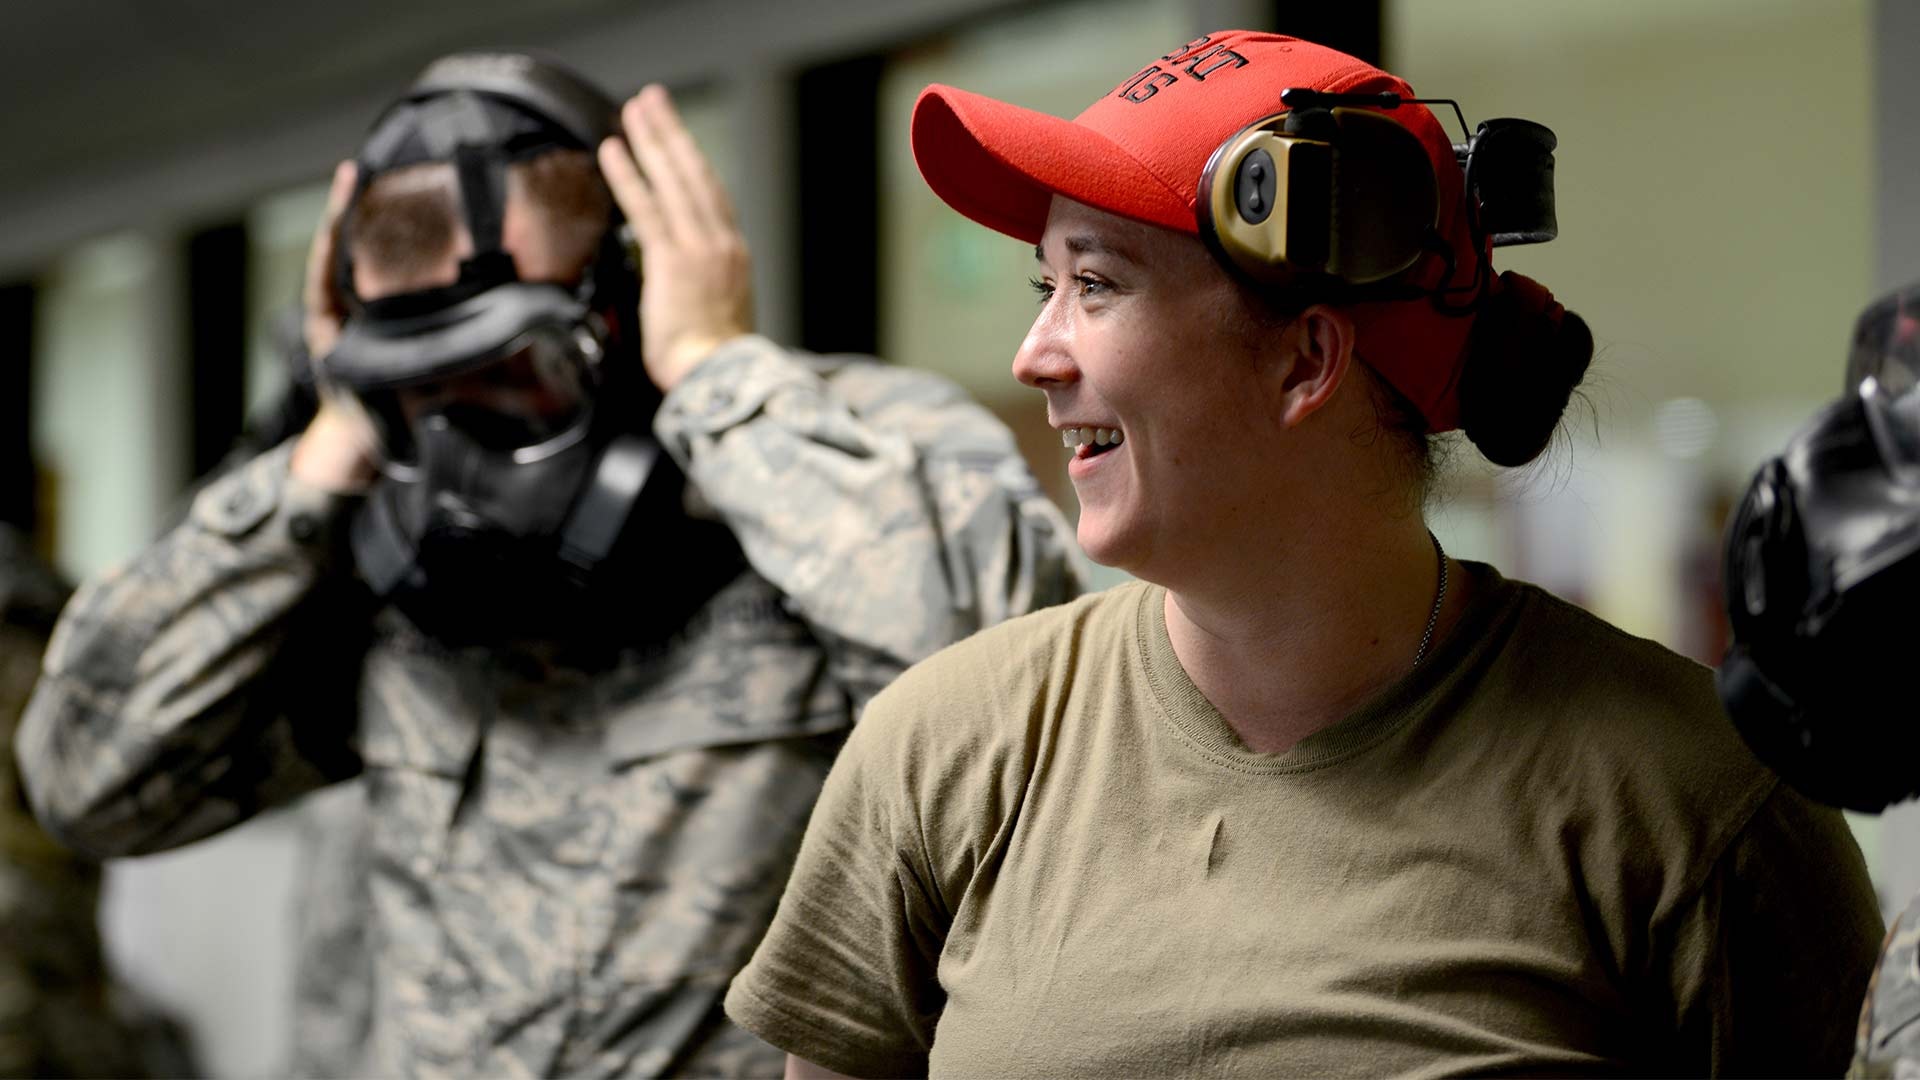 Staff Sgt. Brandee Hahn, combat arms instructor from the 31st Security Forces Squadron, at Aviano Air Base, Italy, teaches an Air Force Qualification Course at Aviano’s indoor firing range, June 20